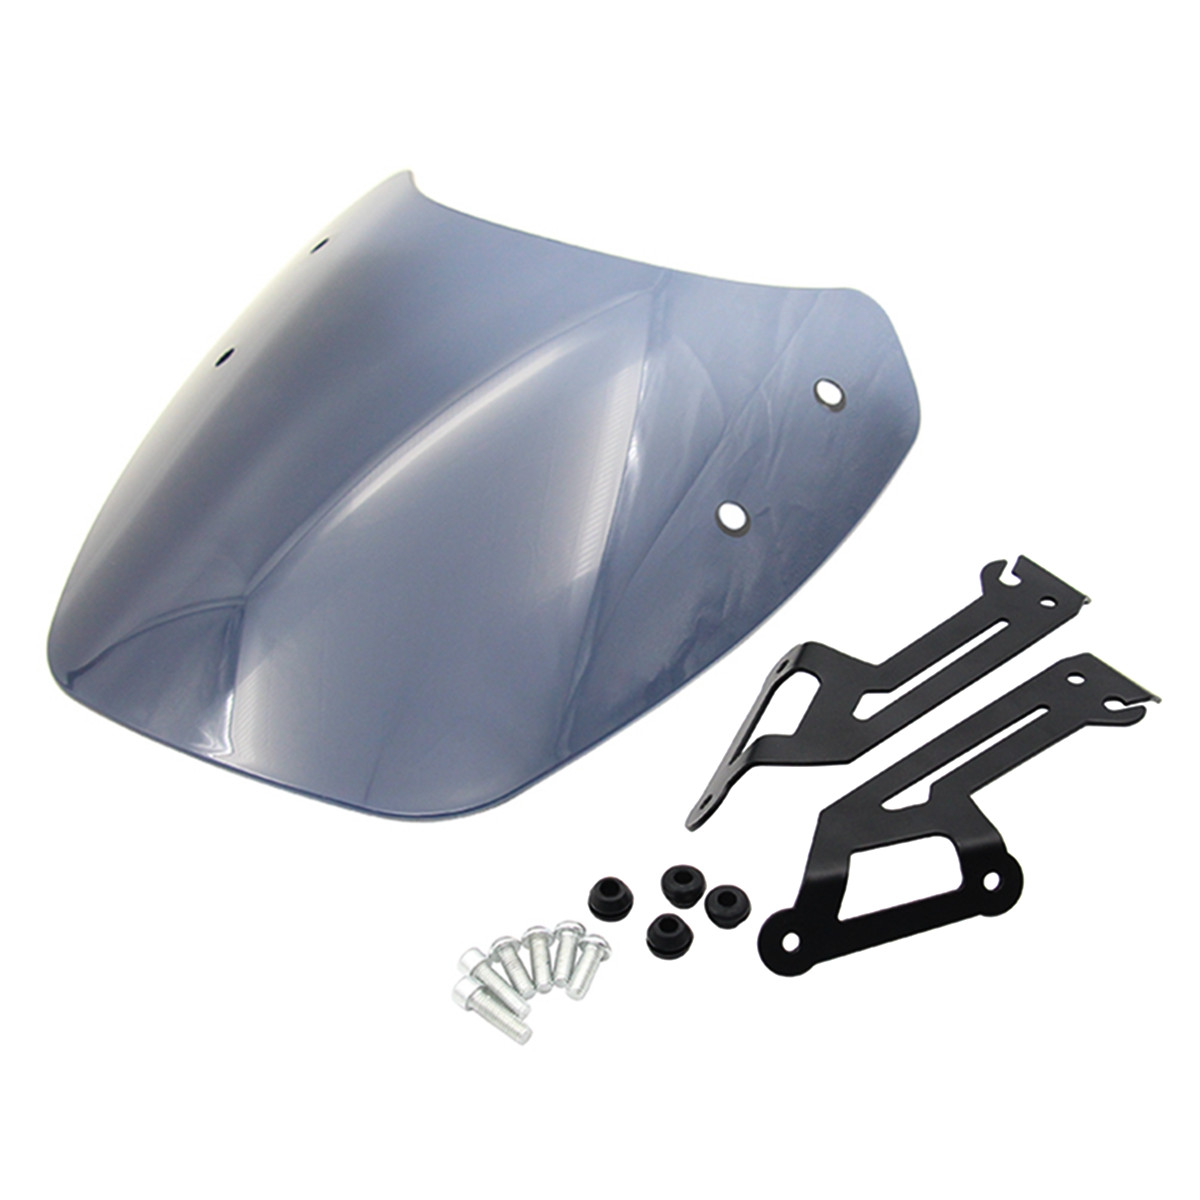 Windscreen Windshield Screen Protection with Holder for Ducati Scrambler 2015-20